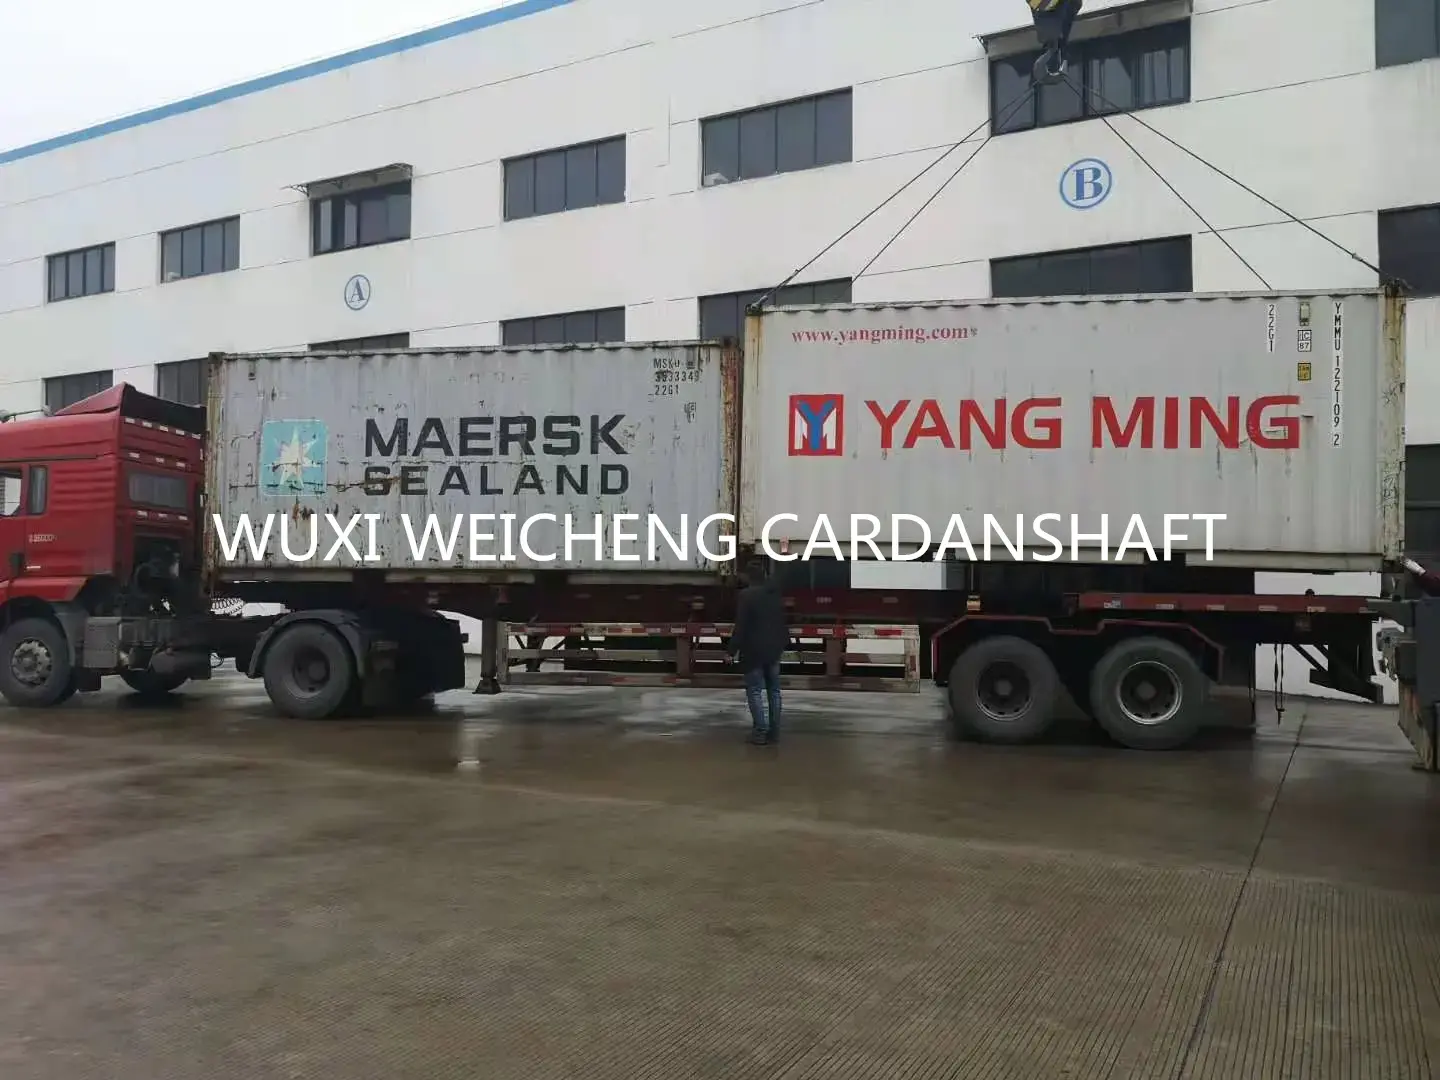 The container full of our cardan shafts has been successfully delivered to Saudi customer